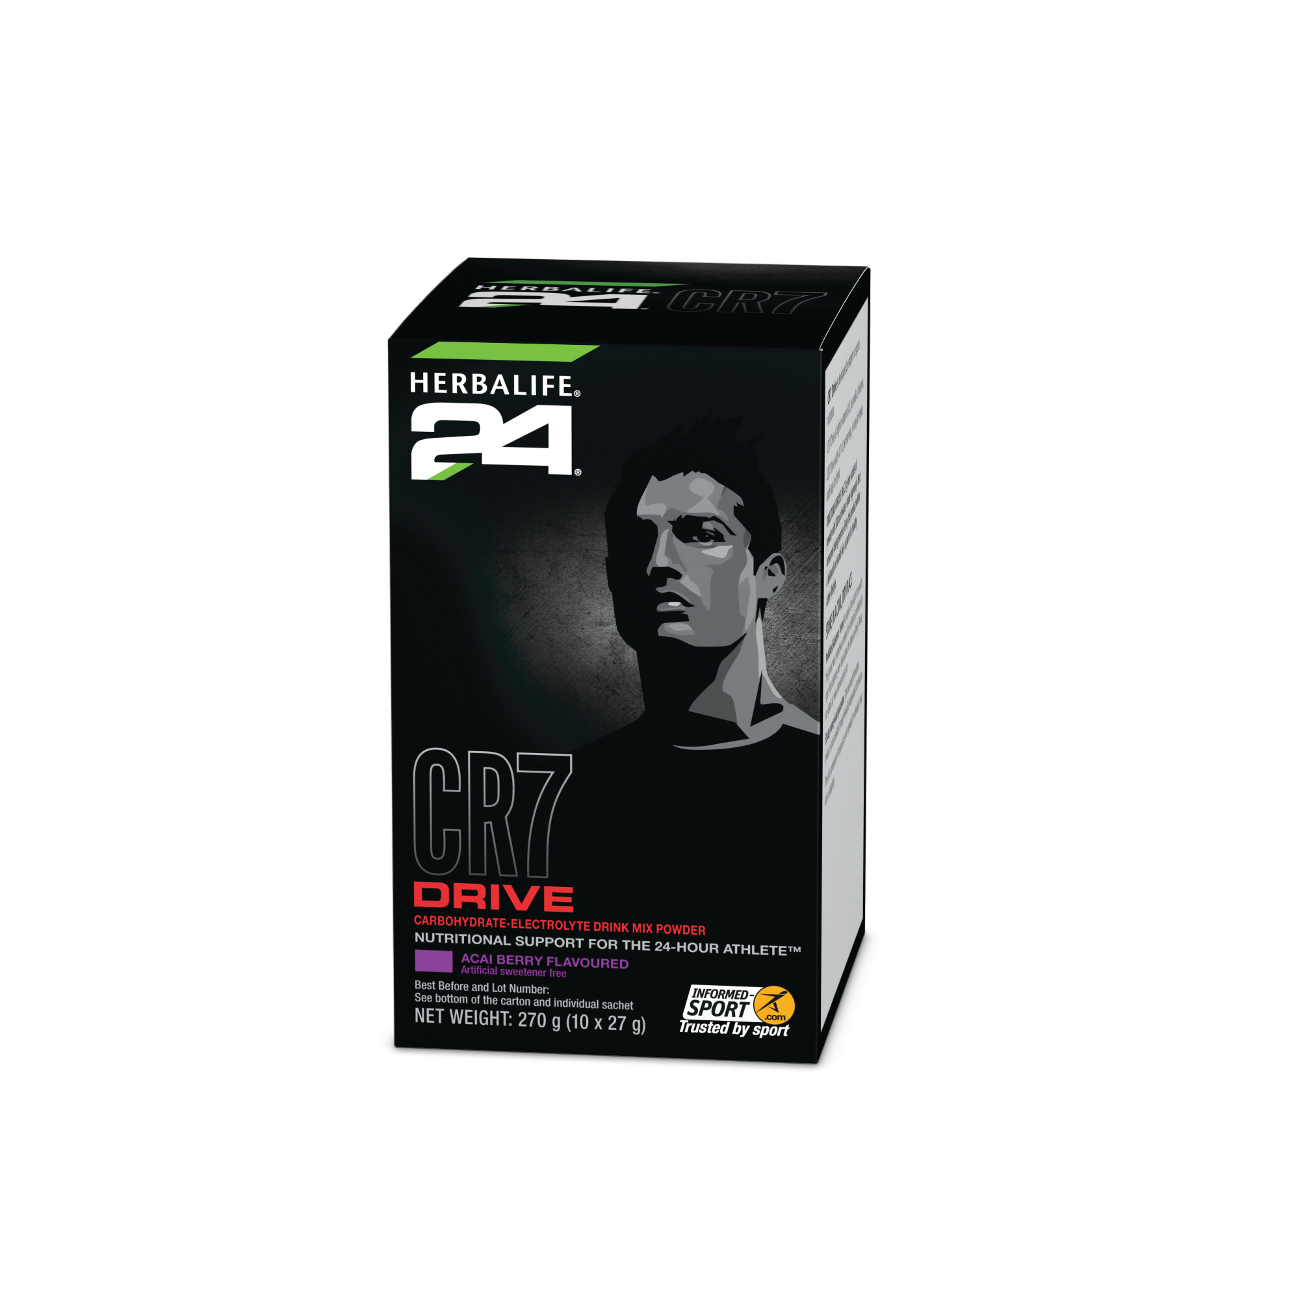 Herbalife24® CR7 Drive Carbohydrate-Electrolyte Drink Mix Acai Berry Flavoured 10 g product shot